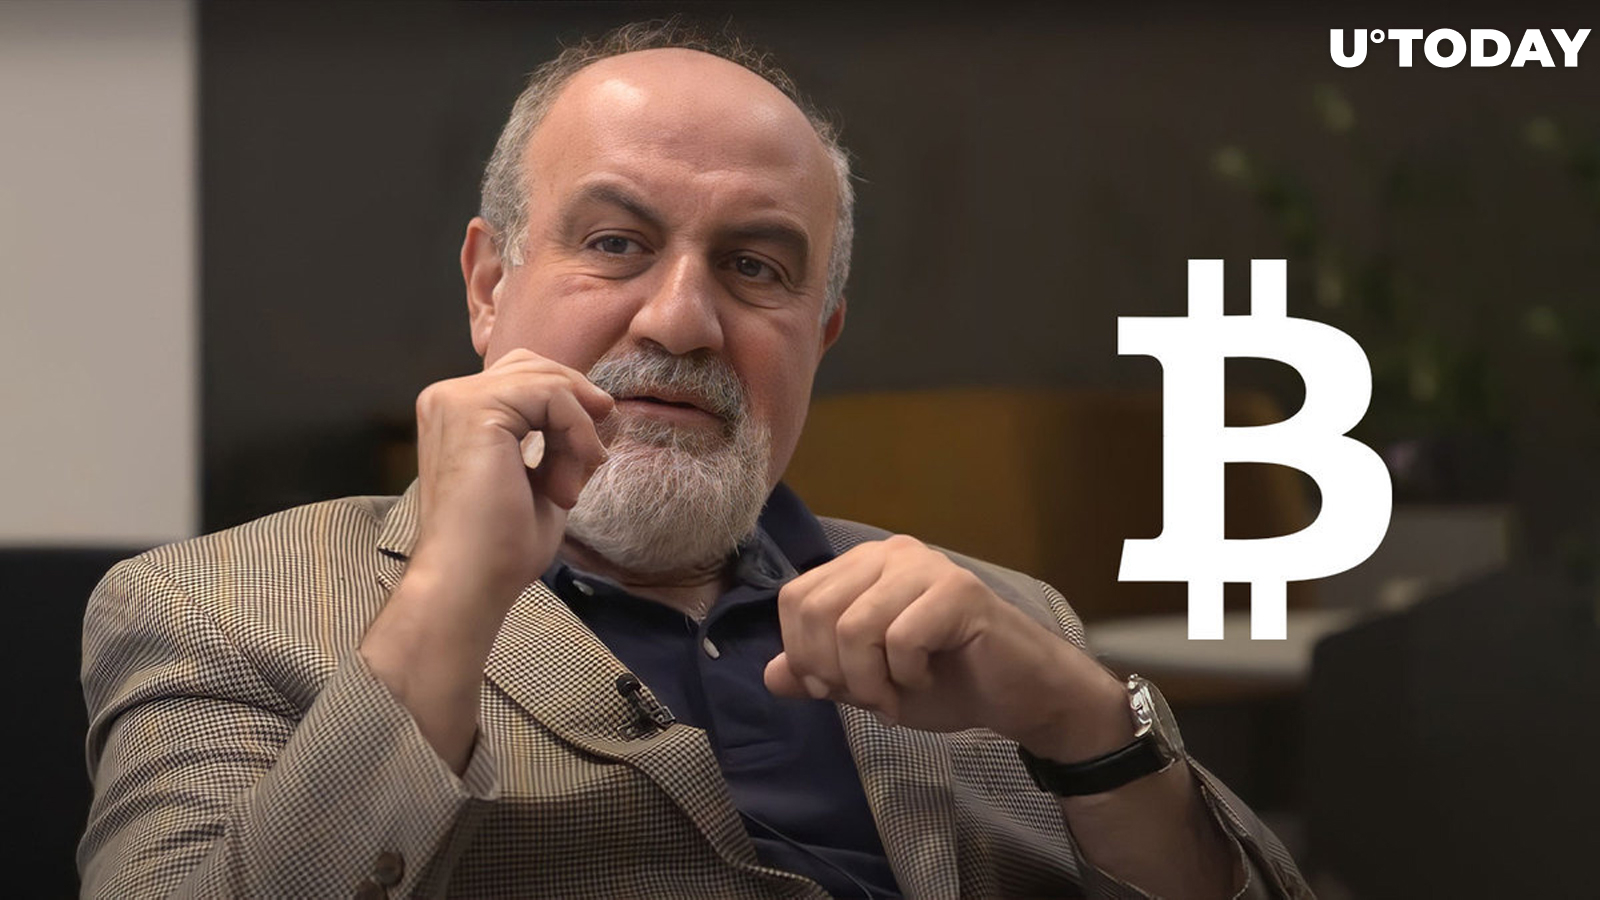 'Black Swan' Author on Bitcoin's Decline: 'This Is How Open Ponzis Implode'